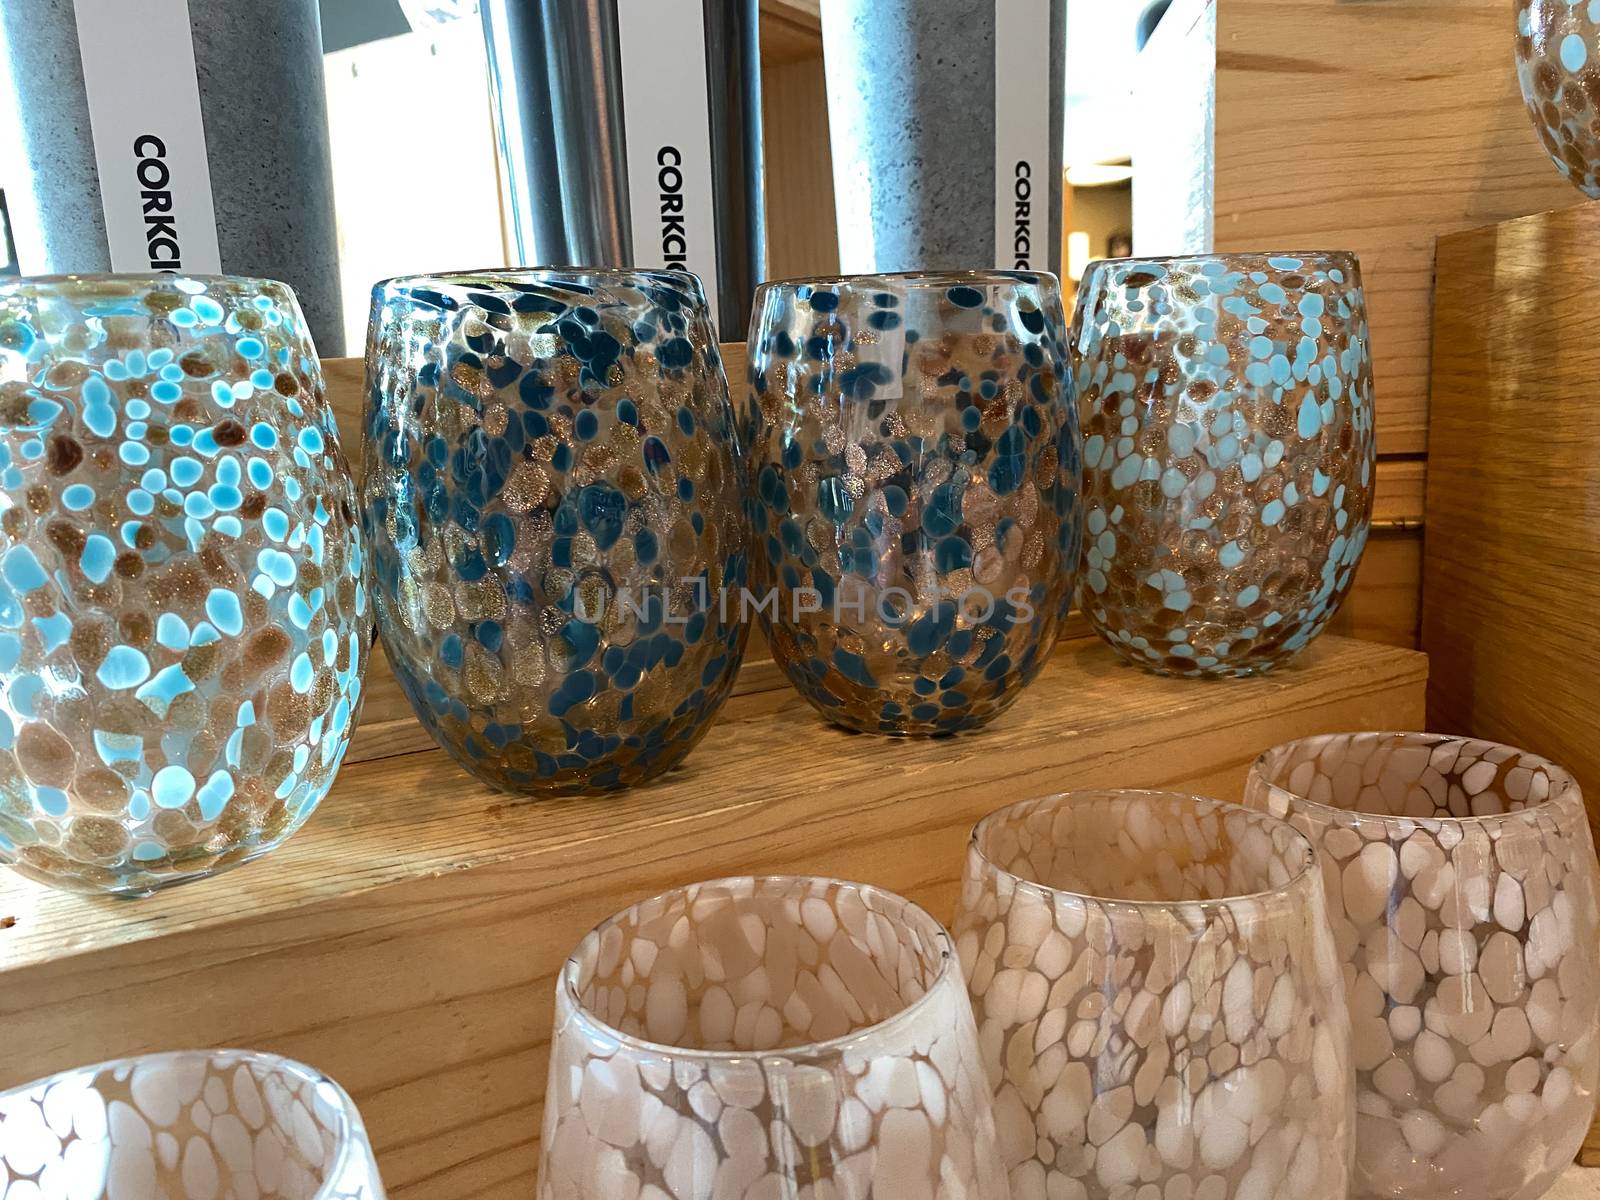 Naples, FL/USA - 10/30/20:  Wine glasses for sale at a Coopers Hawk Wine bar and restaurant in Naples, Florida.